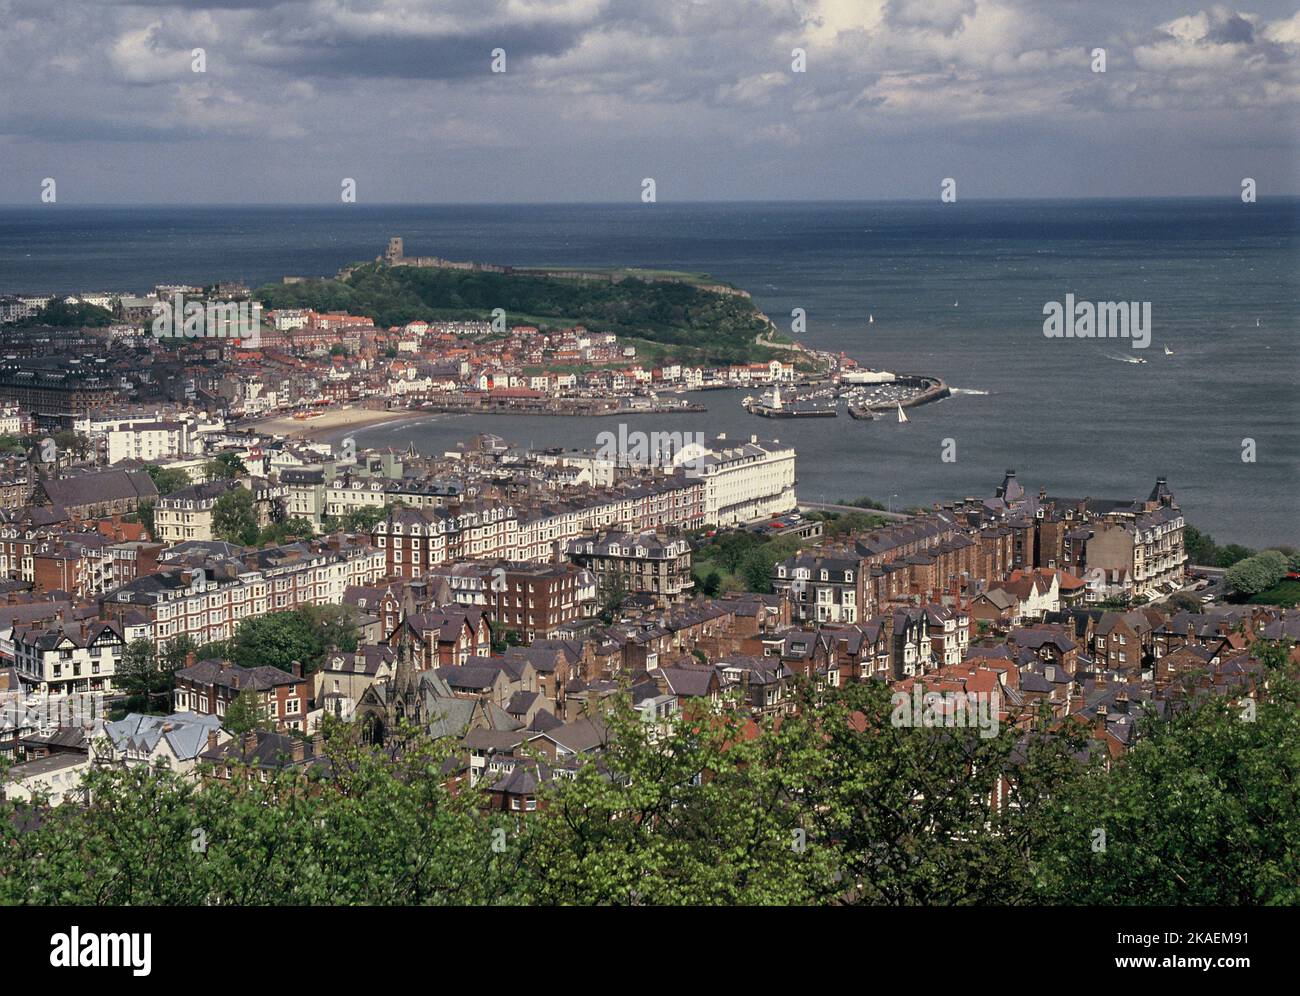 United Kingdom. England. North Yorkshire. Scarborough. Town overview. Stock Photo